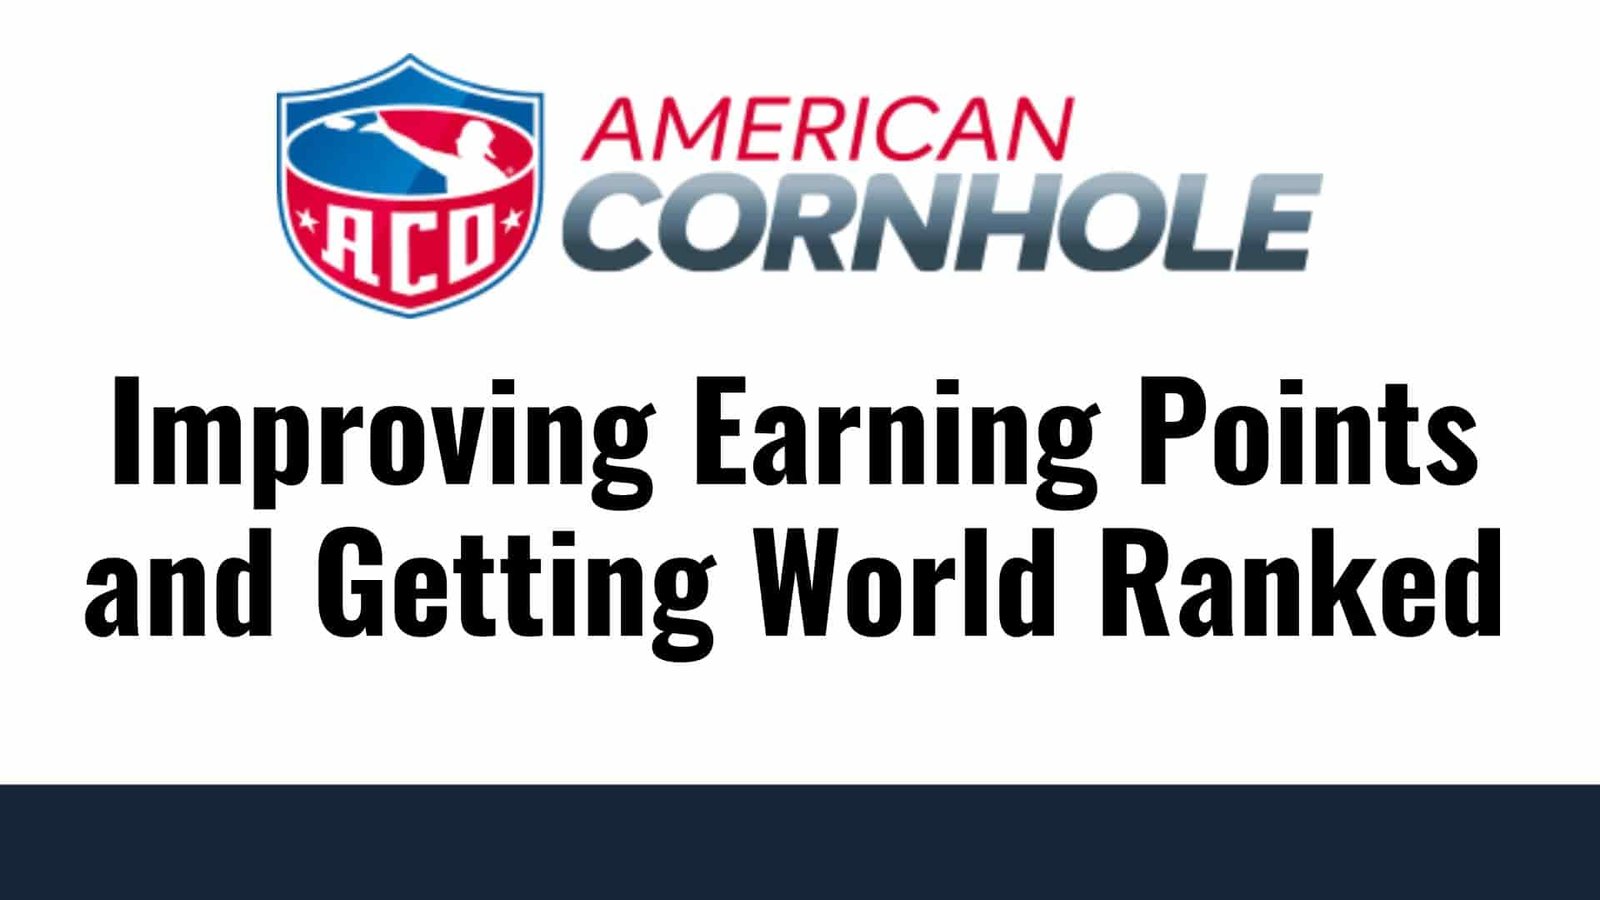 Improving Cornhole Earning Points and Getting World Ranked